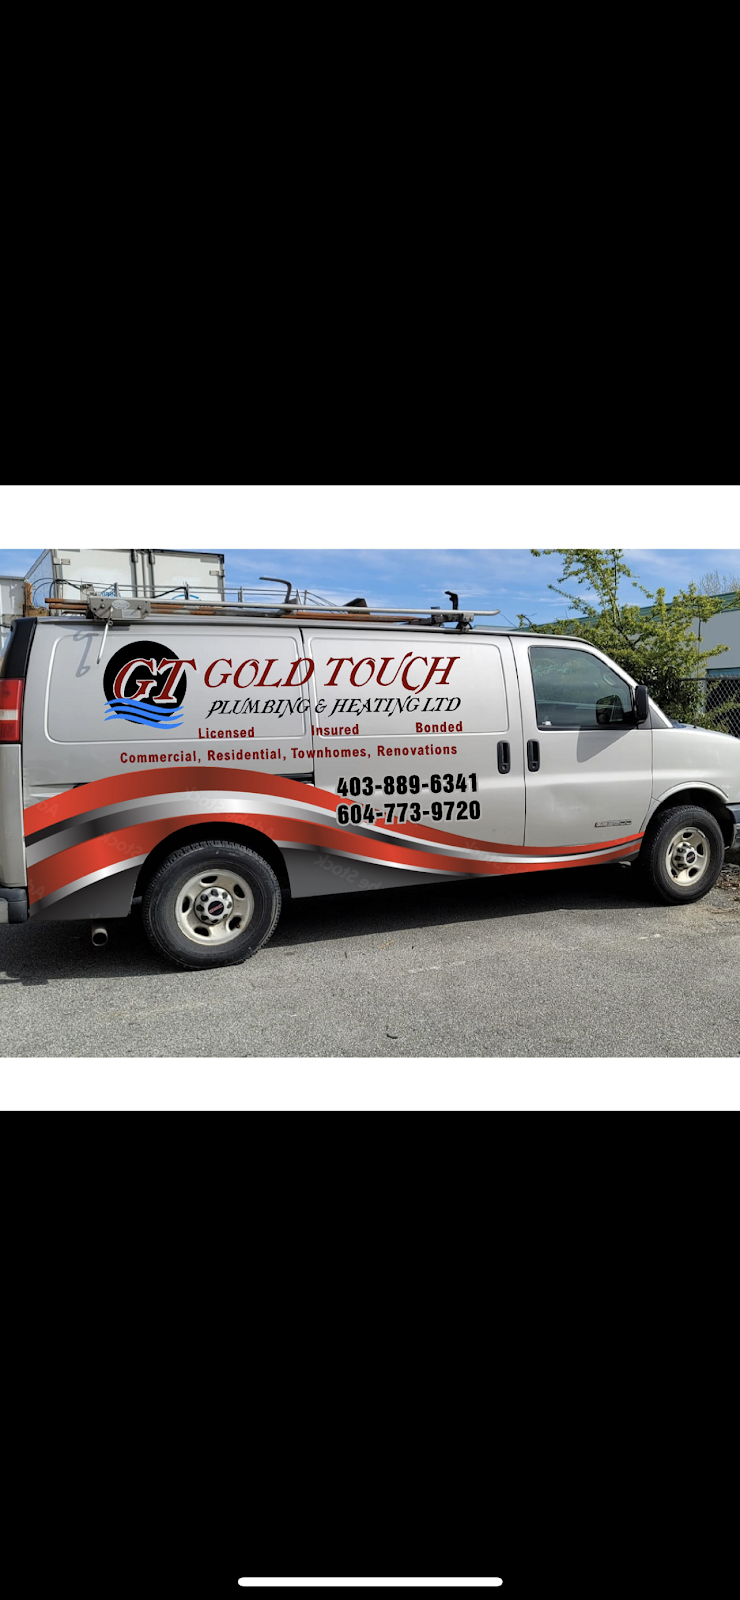 Gold touch plumbing and heating ltd | 8179 144 St, Surrey, BC V3W 5T3, Canada | Phone: (604) 773-9720